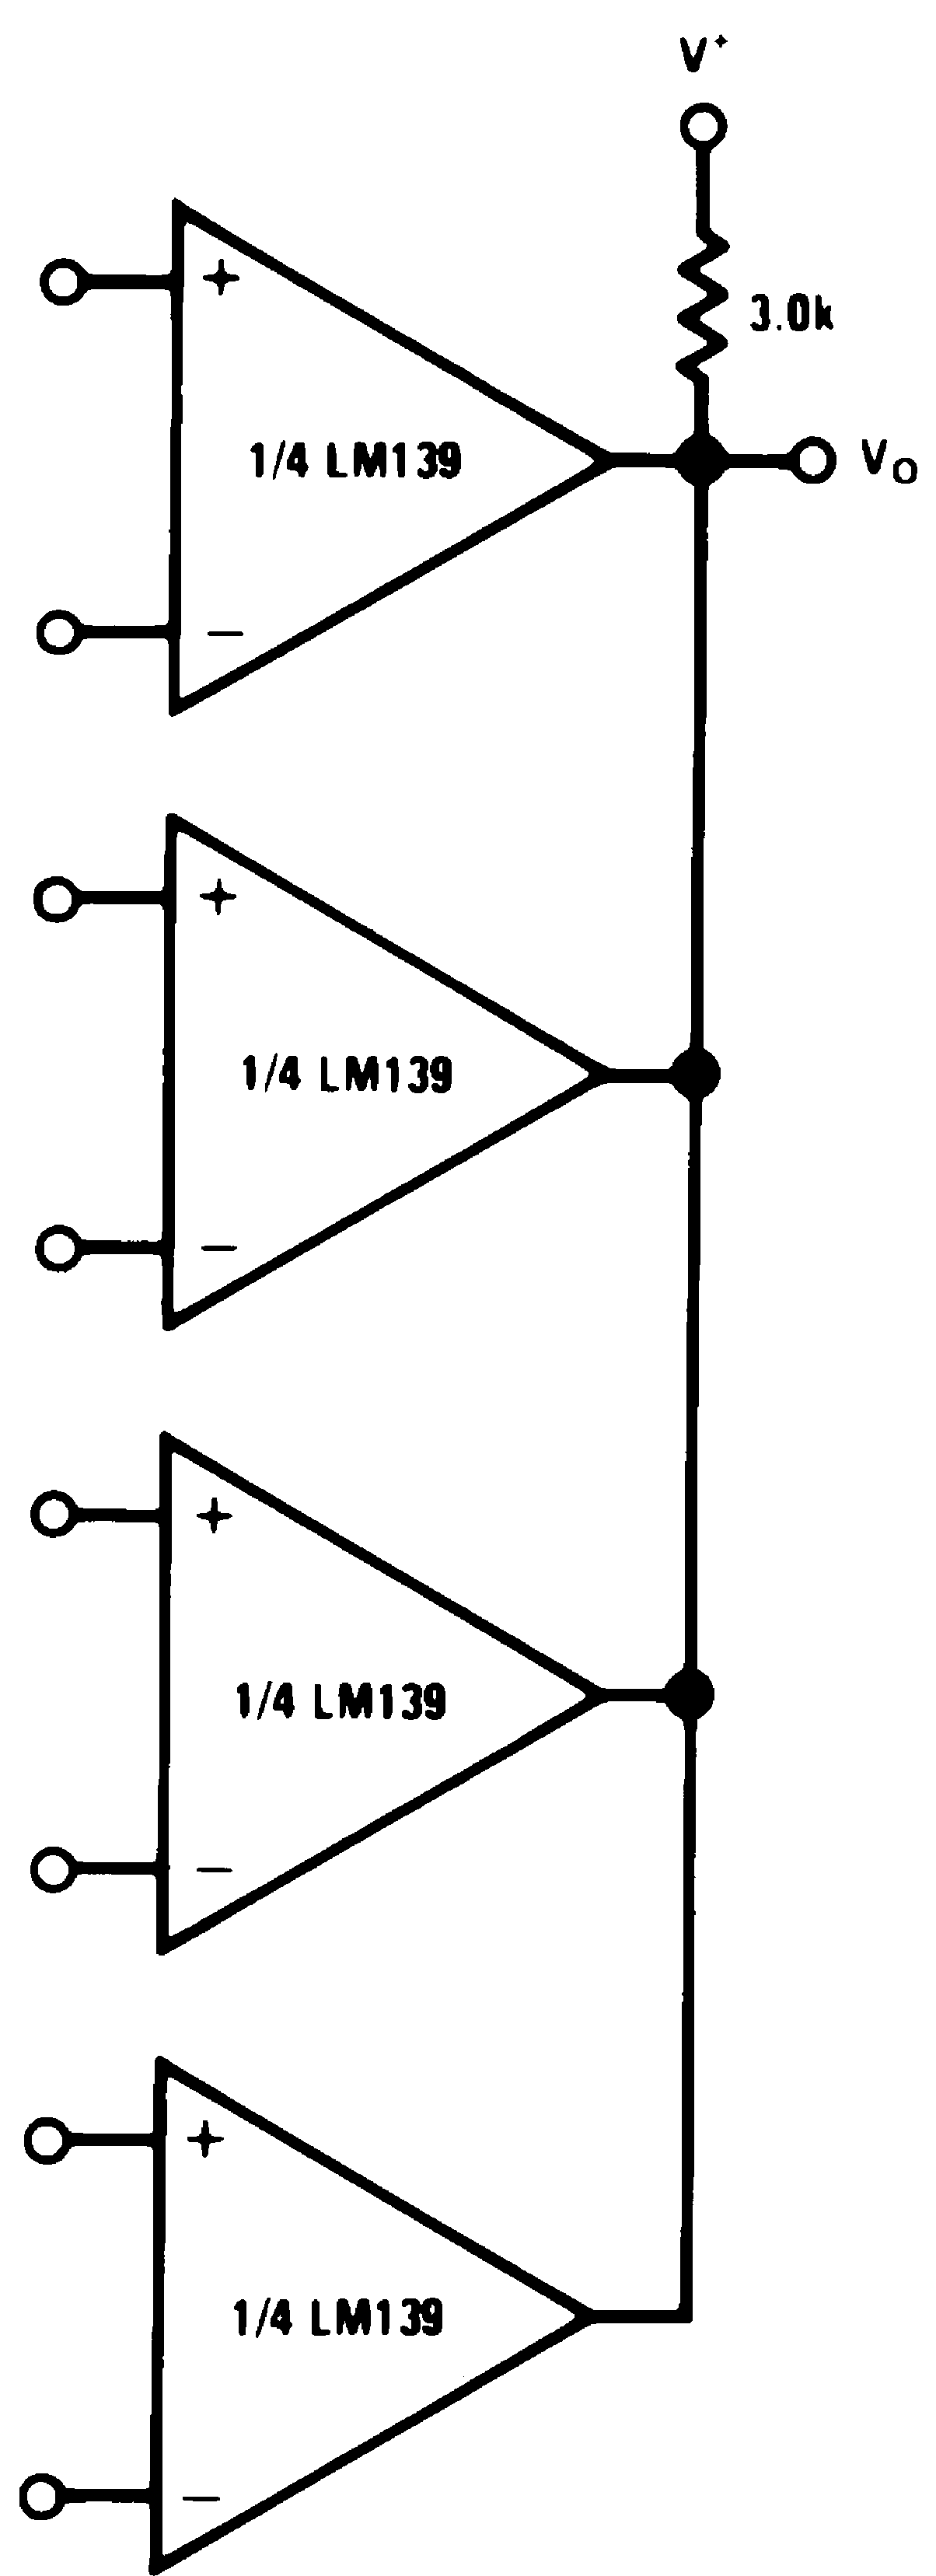 LM339-MIL lm339-mil-oring-the-outputs-schematic.png